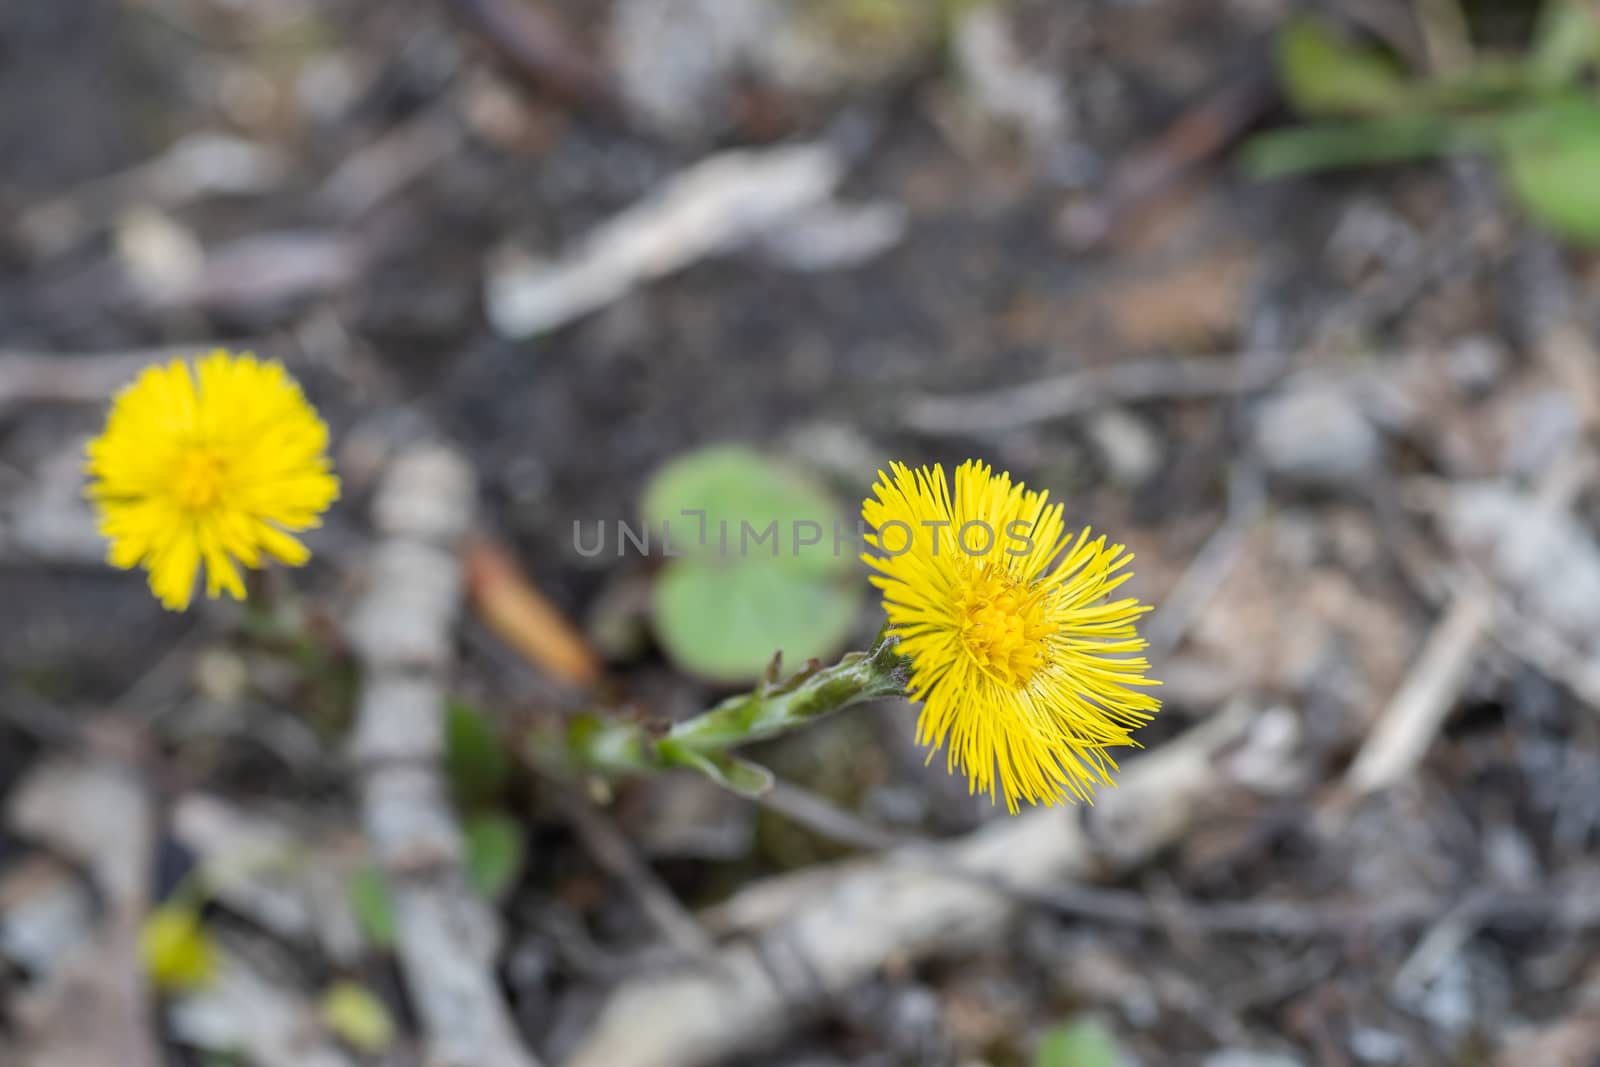 coltsfoot - Tussilago farfara also known as foalfoot or horsefoot. One of the first blooming flowers in spring. Medicinal plant